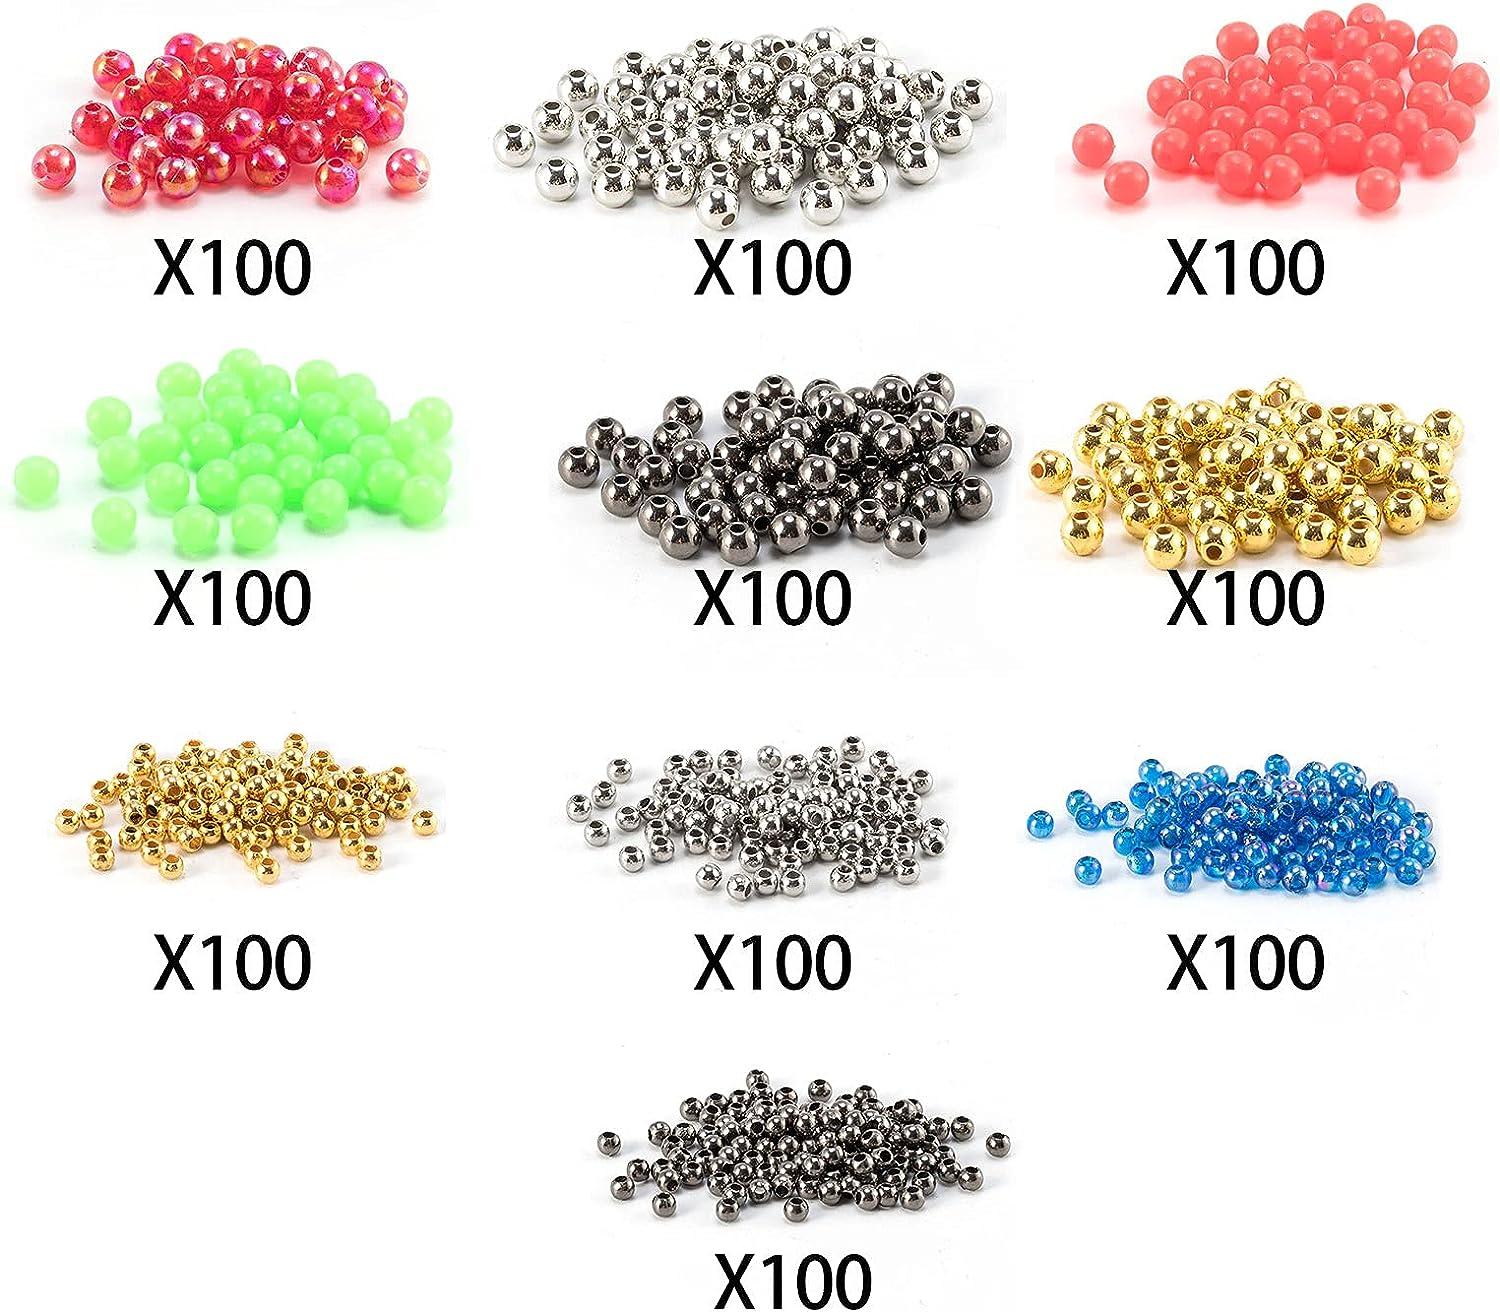 Dr.Fish Fishing Bead Bait Eggs Kits Floating Ball Stopper Plastic with Box  Glow Round Luminous Saltwater Freshwater Salmon Trout 500-3000pcs  1000pcs,0.08/0.12/0.2 inch